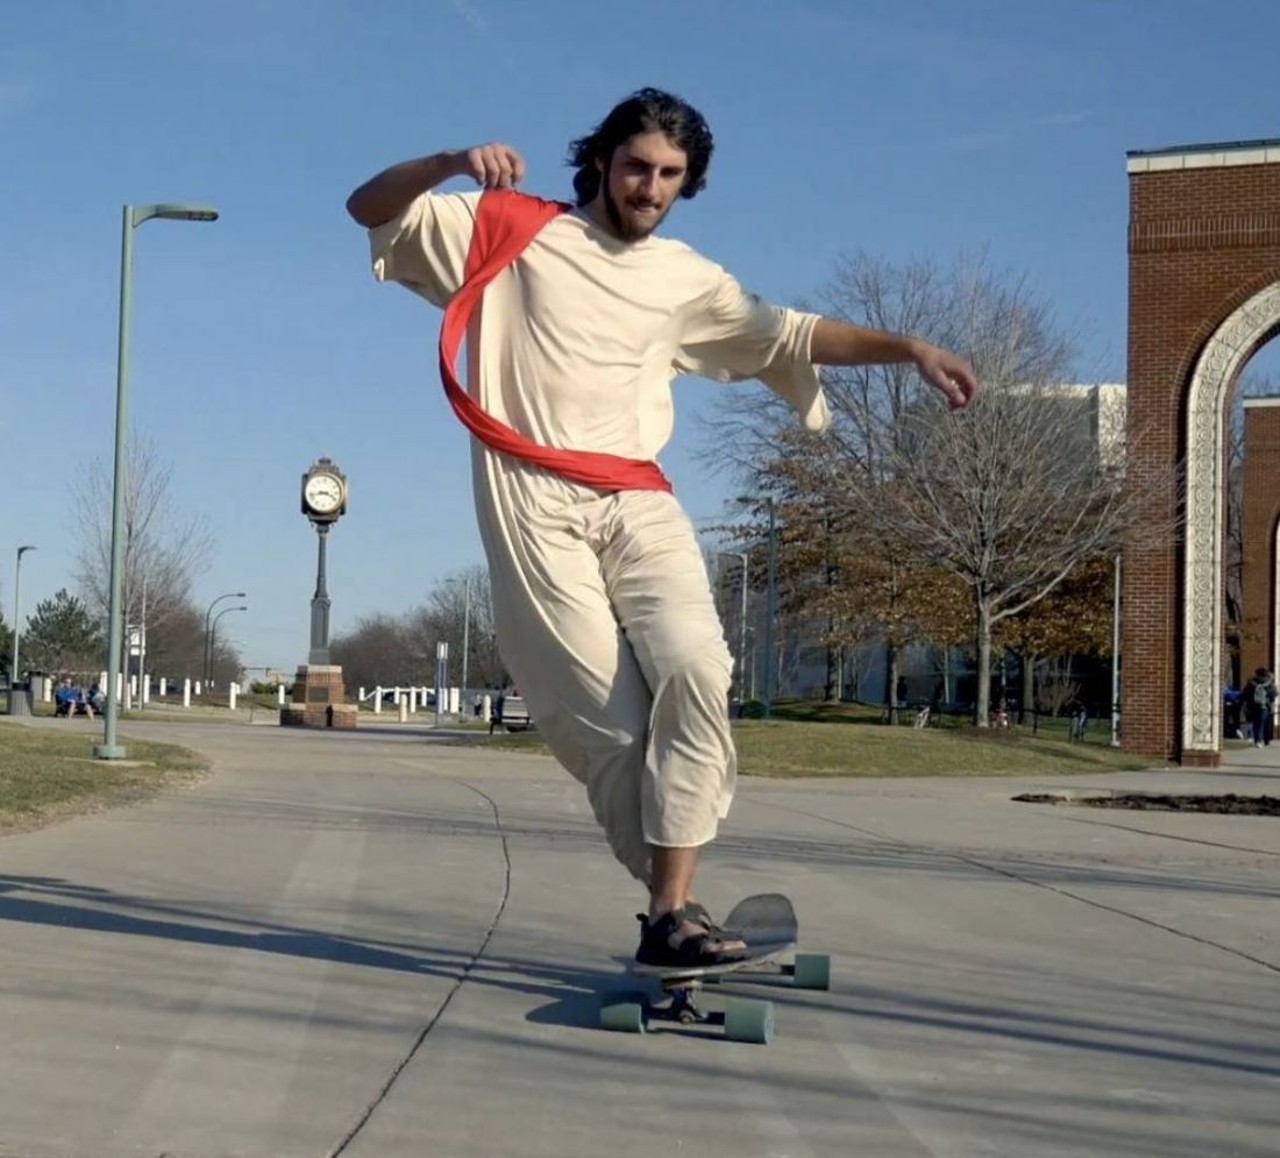  &#147;Why One University of Akron Student Longboards Around Campus Dressed Like Jesus&#148;
Feb. 22
If you&#146;ve ever spotted a Christ-like figure longboarding around the University of Akron, you (probably) weren&#146;t hallucinating. Chances are it was Joe Gerin, or &#147;Longboard Jesus,&#148; who put his skateboarding skills and distinctive facial hair to good use earlier this year.
Photo via @JMGerin/Instagram